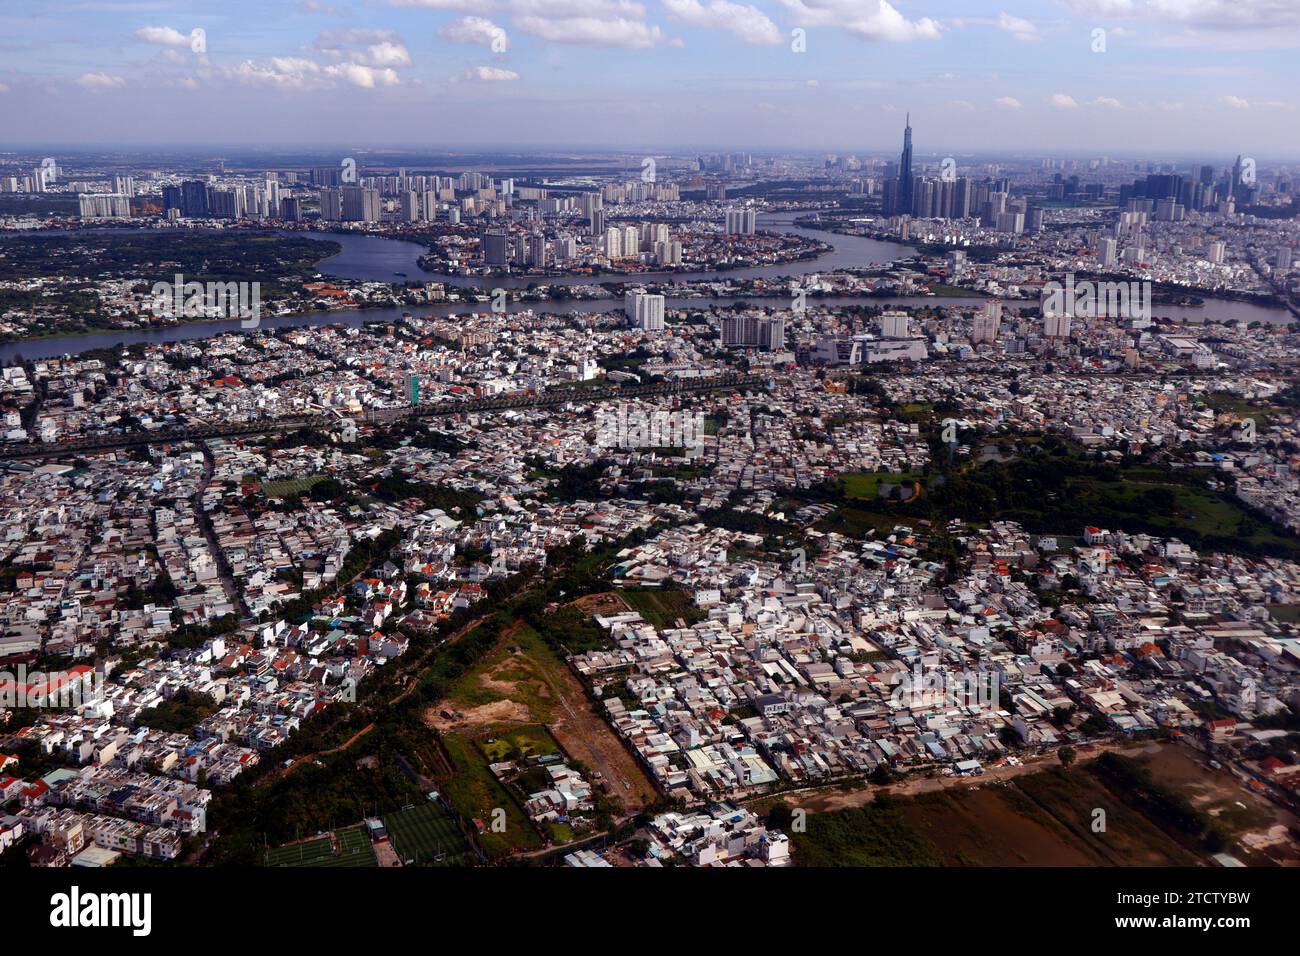 Aerial view of Ho Chi Minh City and the Saigon River. Stock Photo